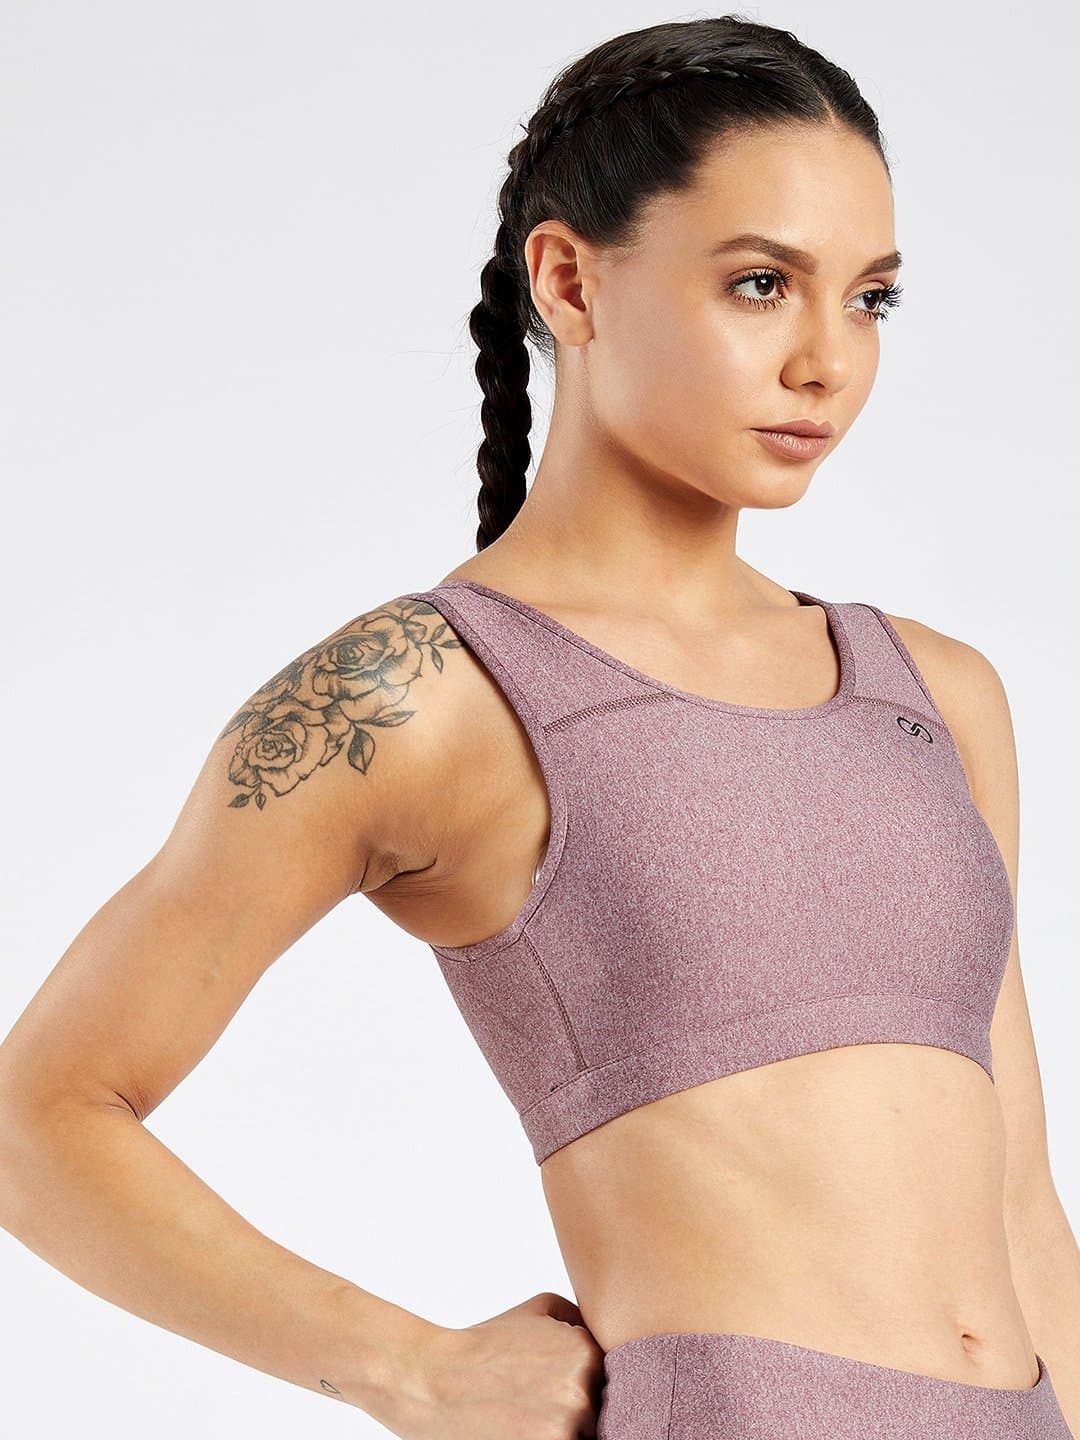 Maxtreme Pace Mellow Rose High Neck Sports Bra